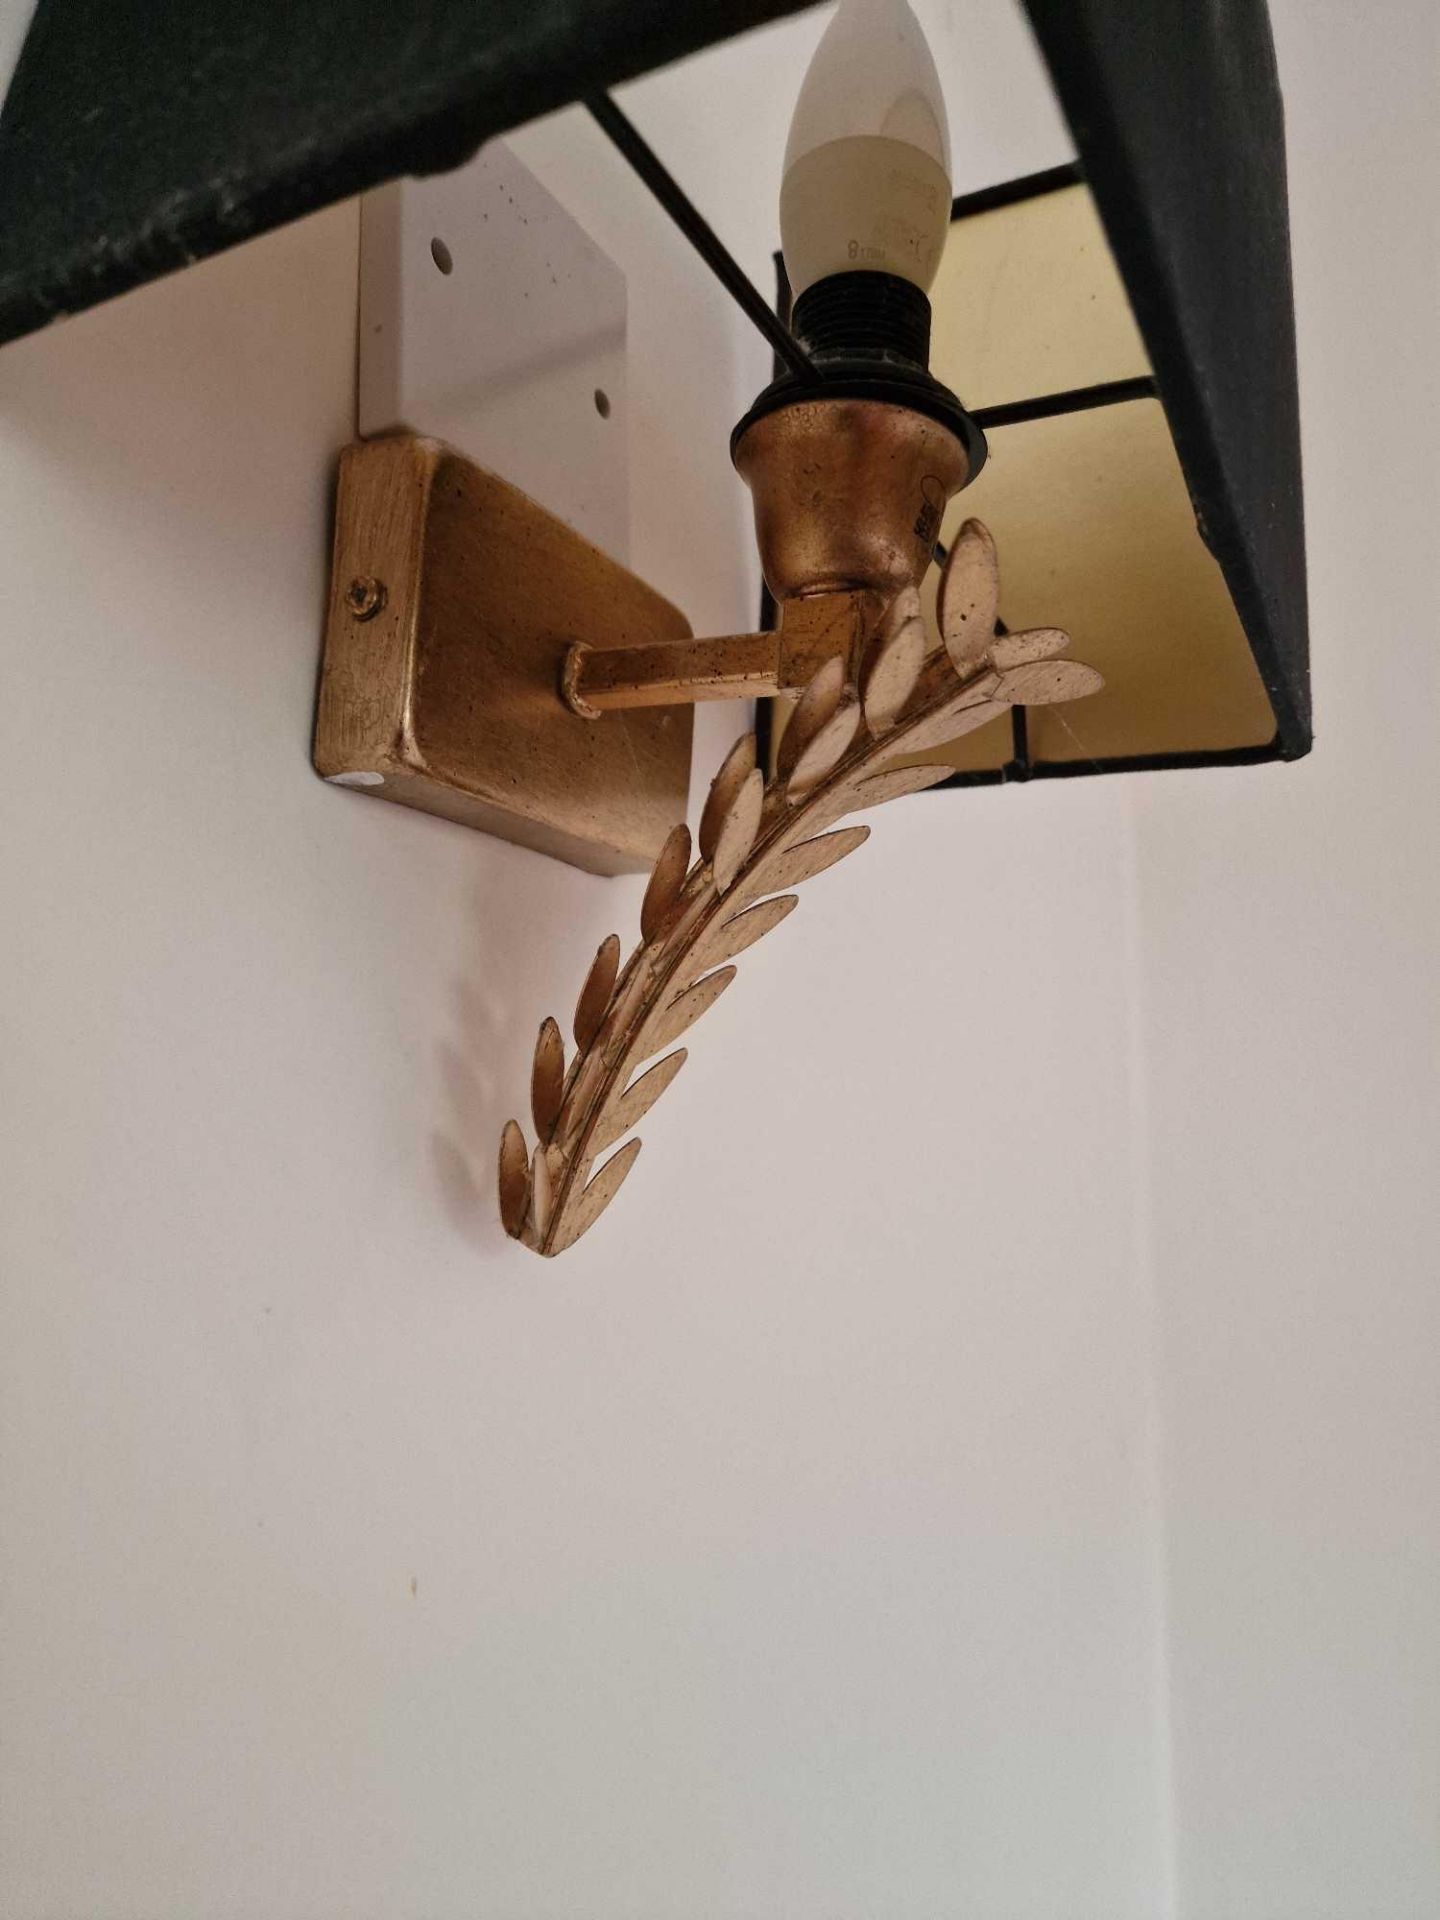 A Polished Brass Single Arm Wall Sconce With Leaf Decoration Complete With Black Box Shade 27cm - Image 2 of 2